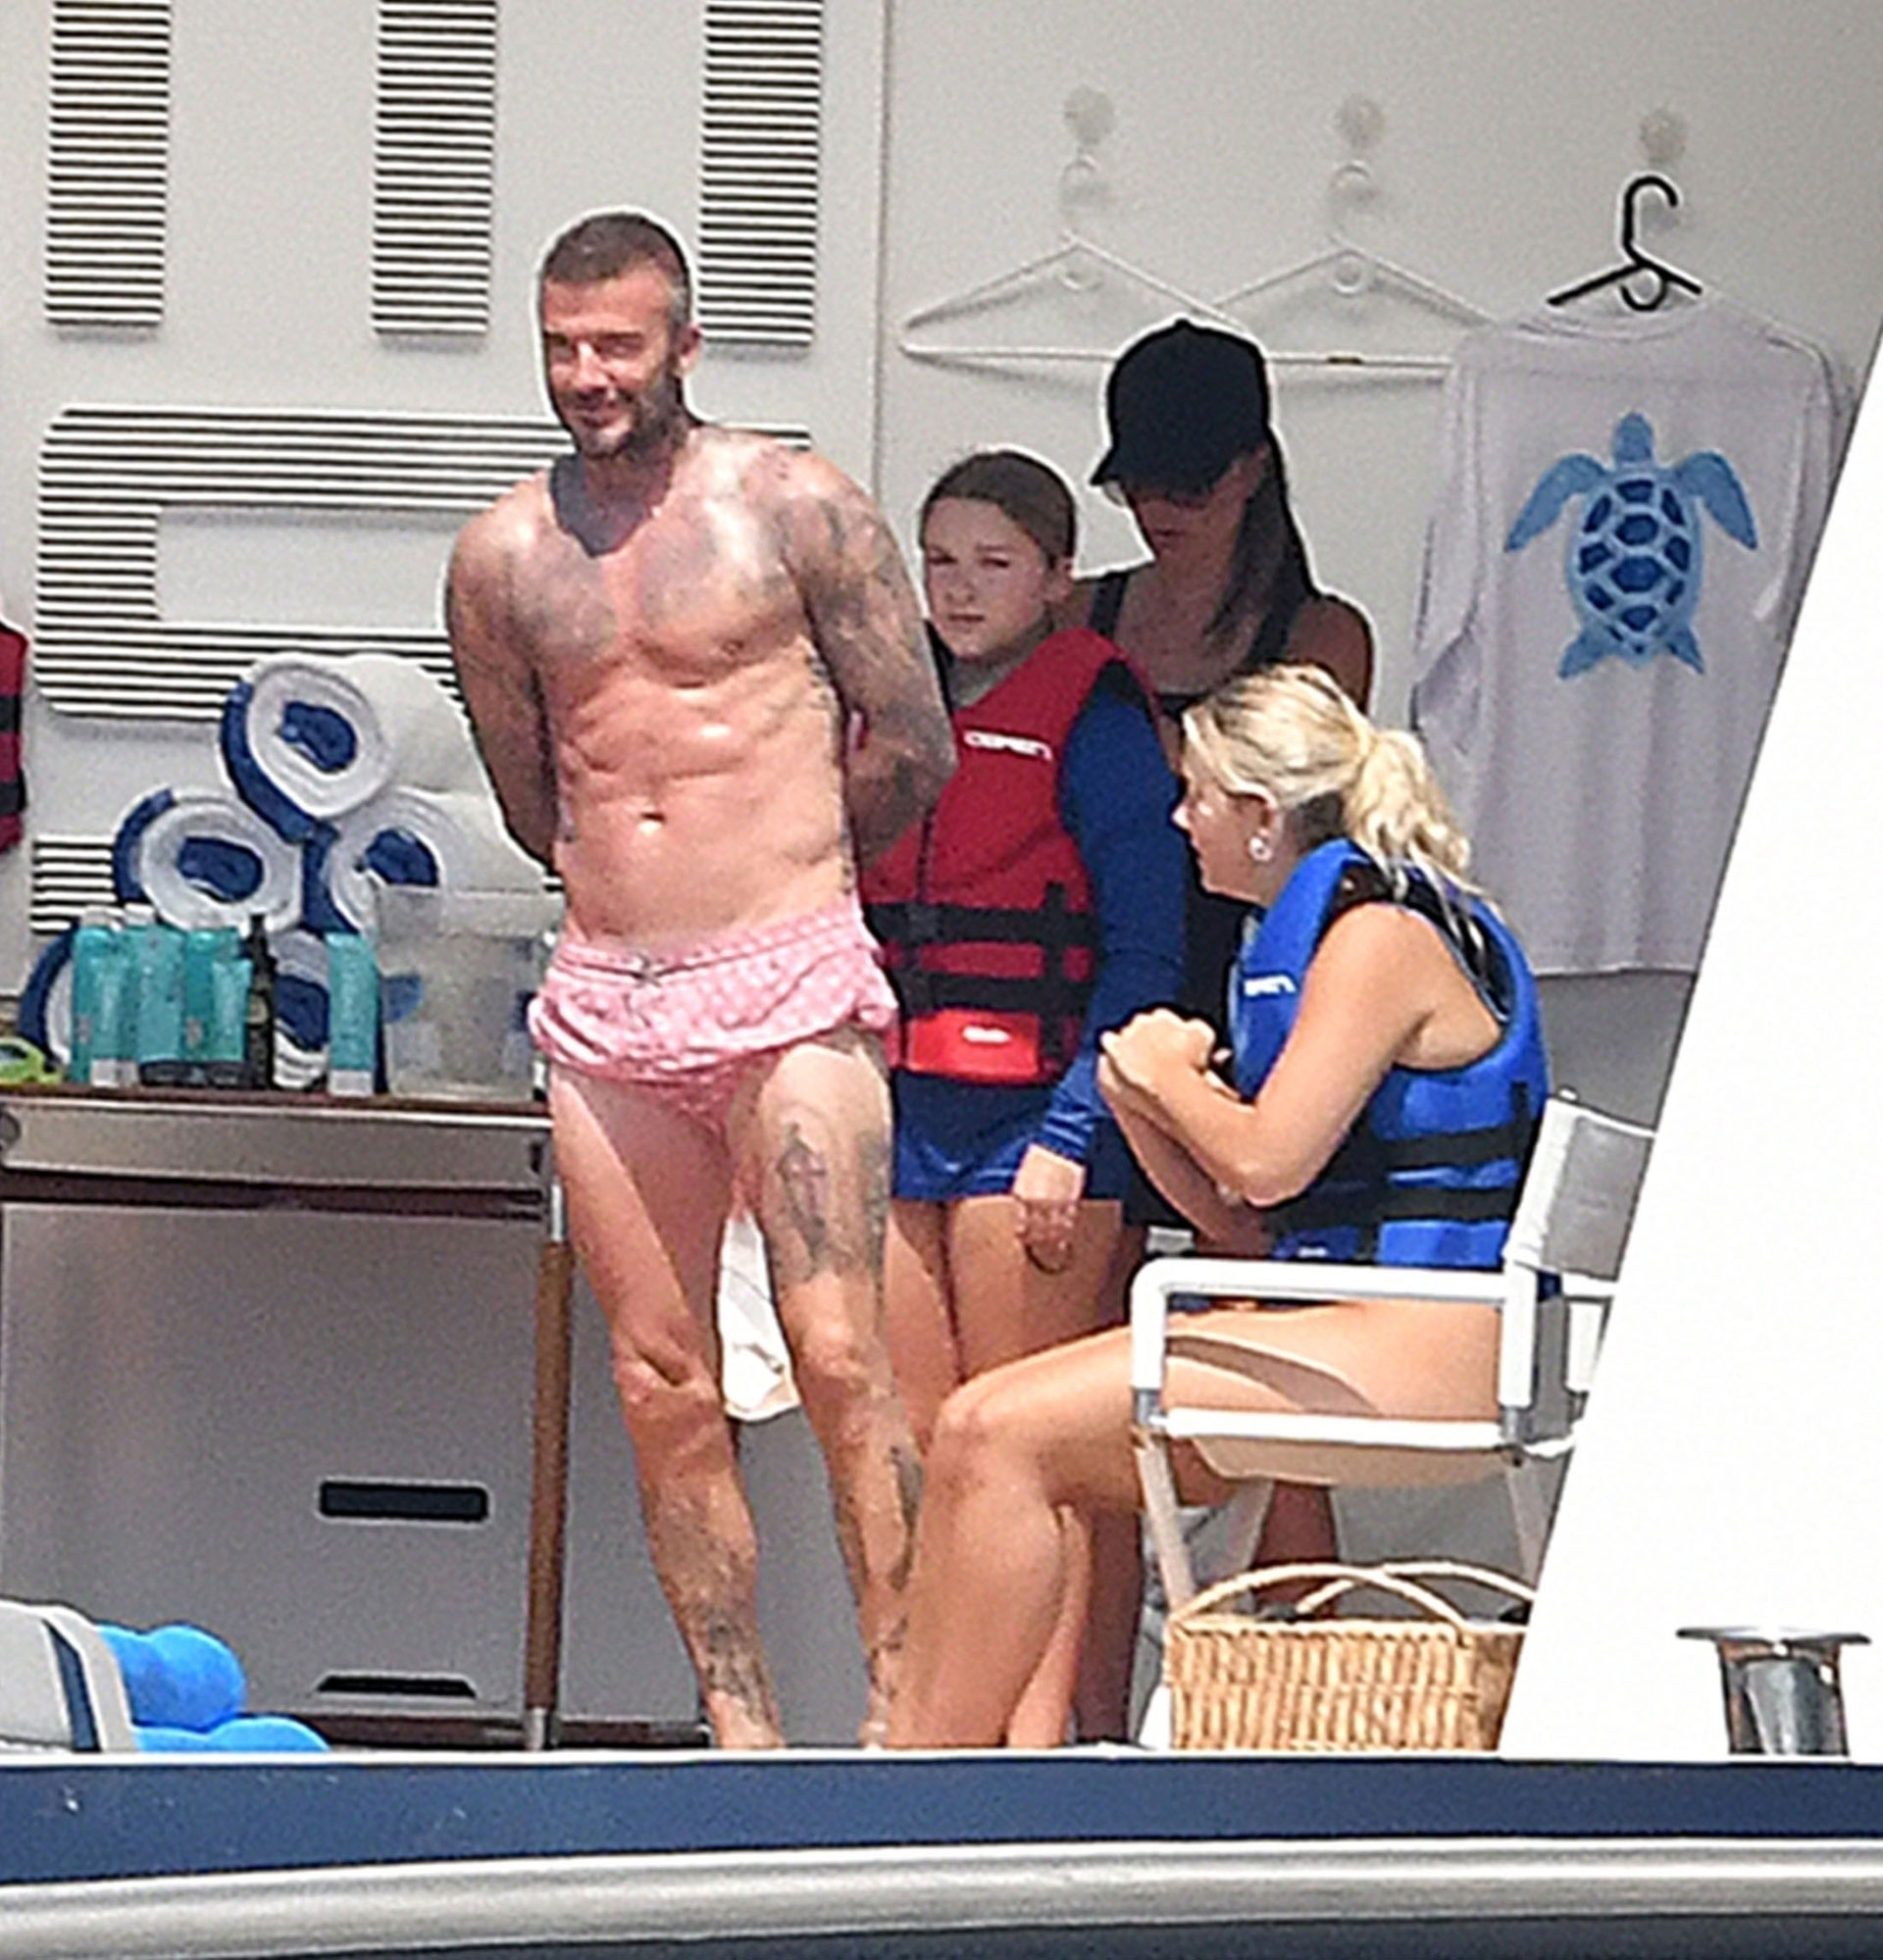 Former English soccer player David Beckham shows off his ripped abs as he relaxes with his wife Victoria Beckham, daughter Harper and son Cruz (who was with his girlfriend) on a yacht in Positano